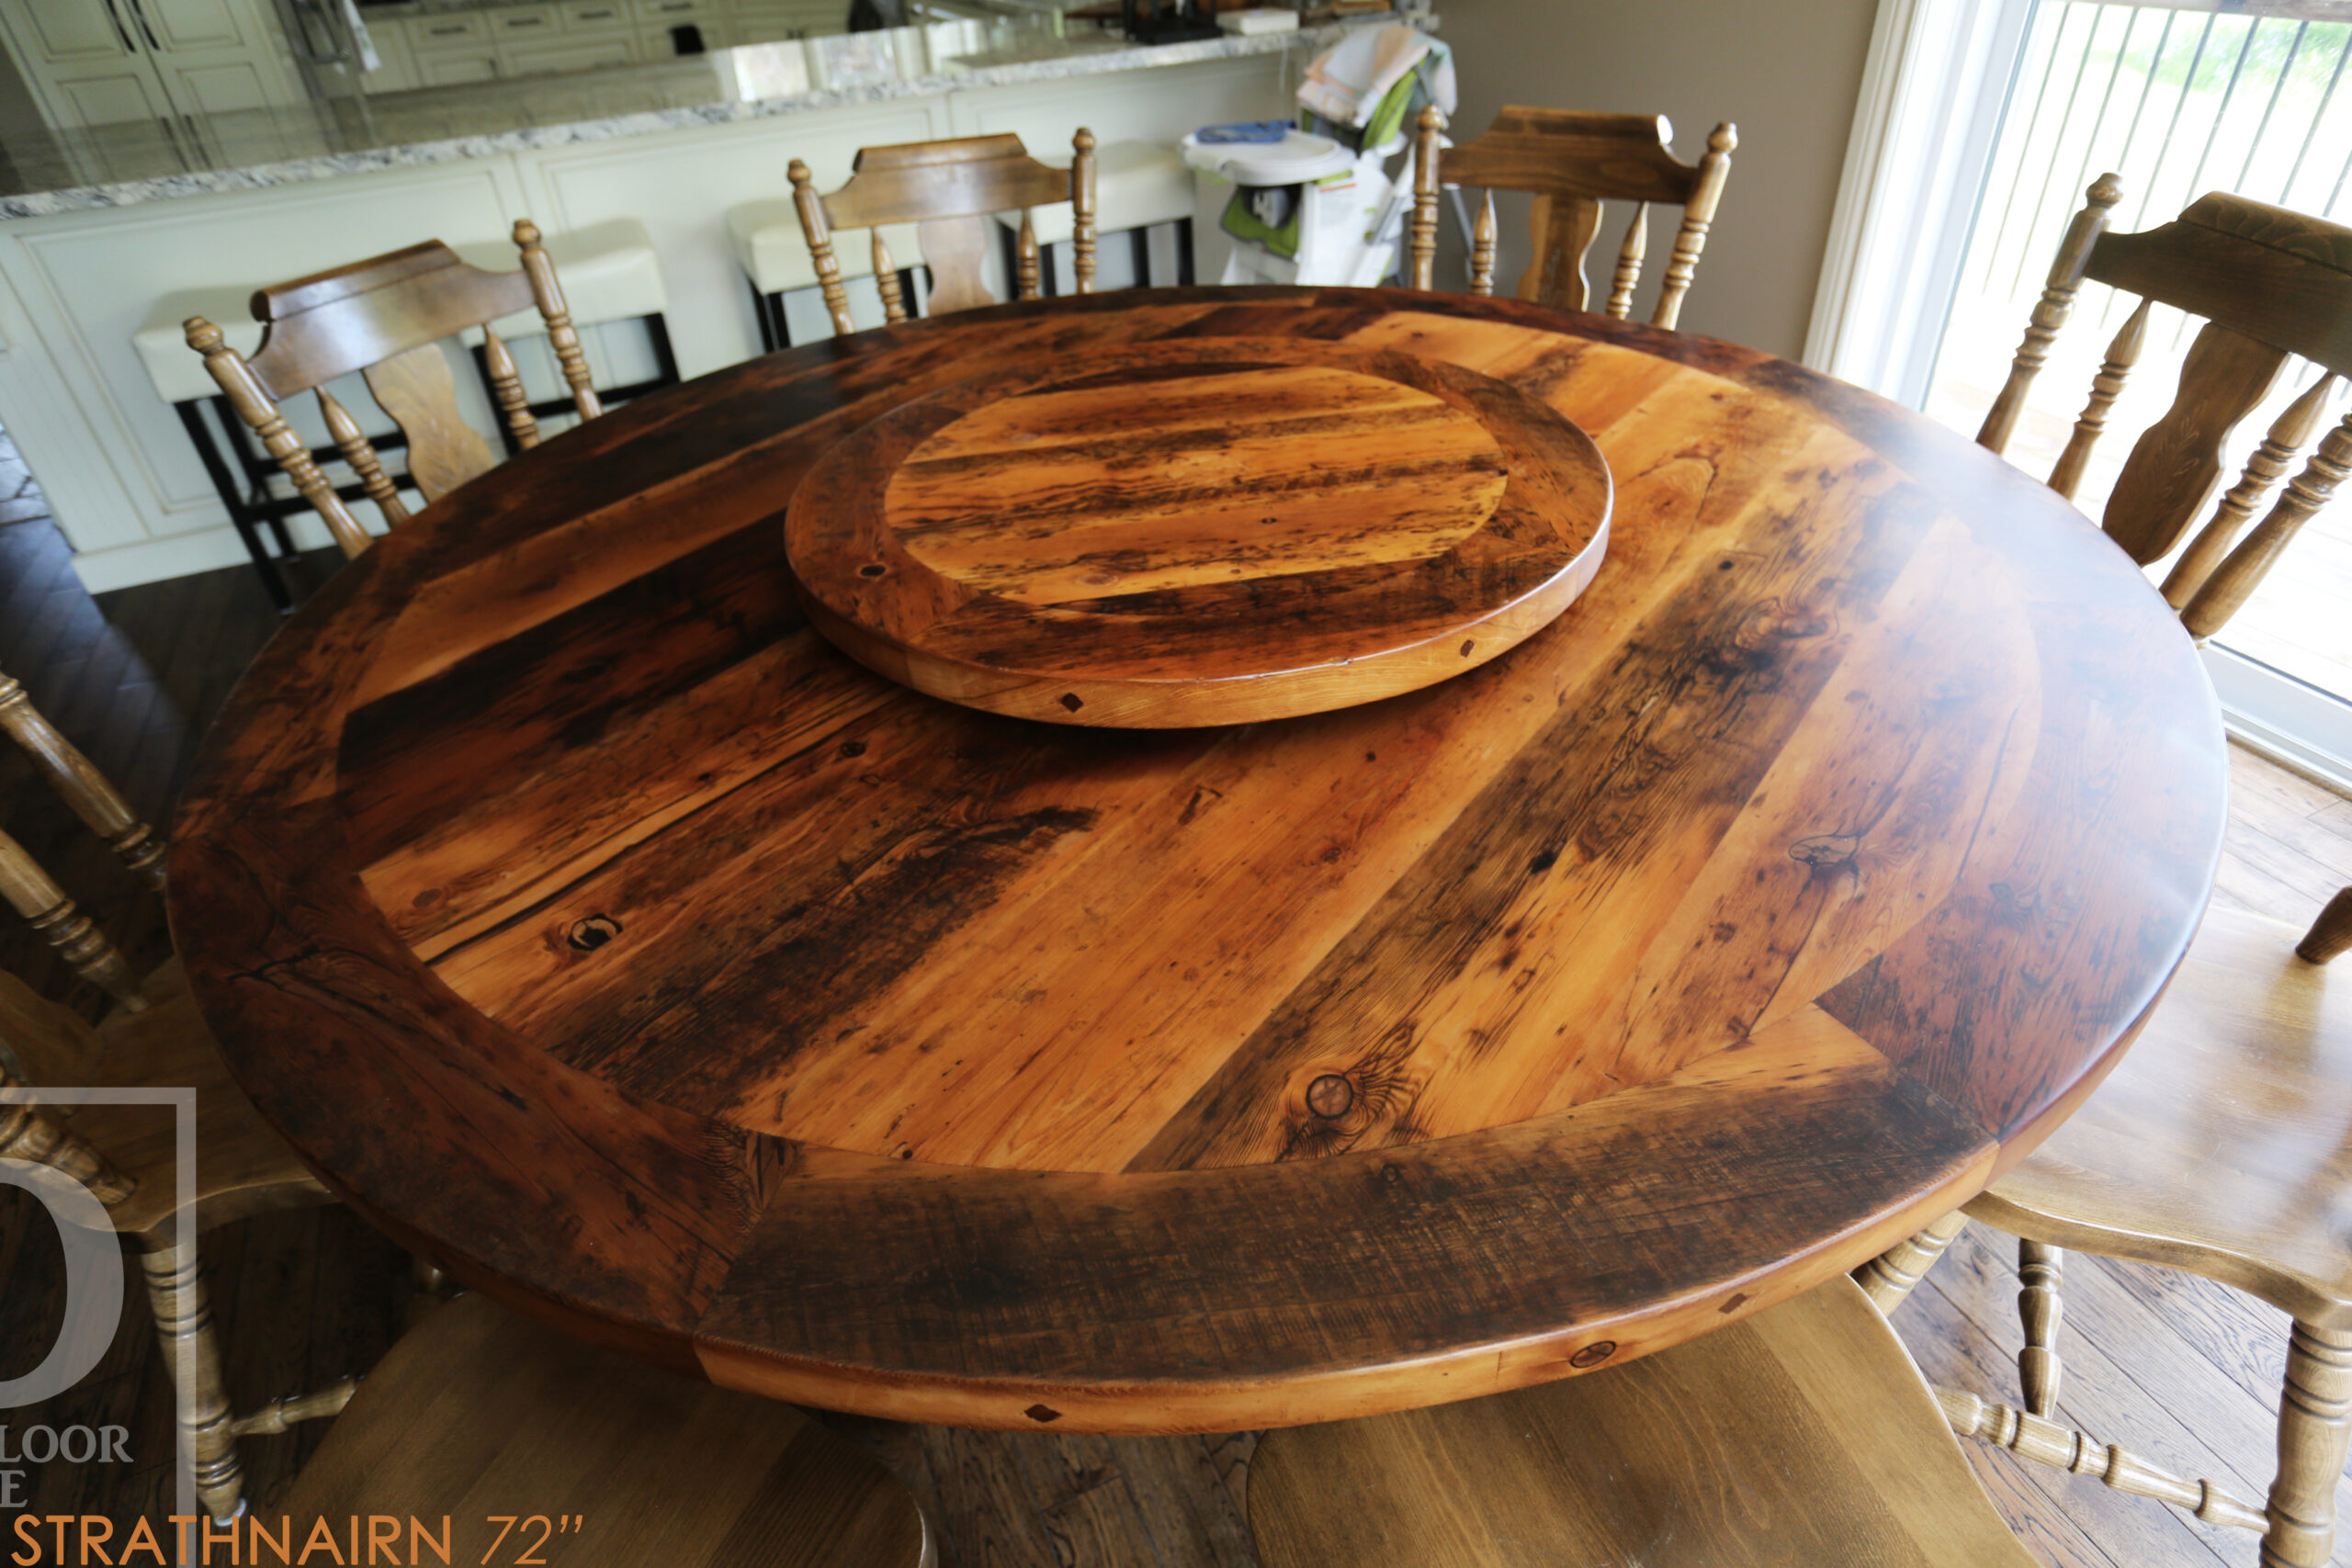 72" Round Ontario Barnwood Table we made for a Meaford, Ontario home - Hand-Hewn Beam Post Base - 2" Hemlock Threshing Floor Top - Original edges & distressing maintained - Premium epoxy + matte polyurethane finish - [Matching] 32" Round Lazy Susan - www.table.ca